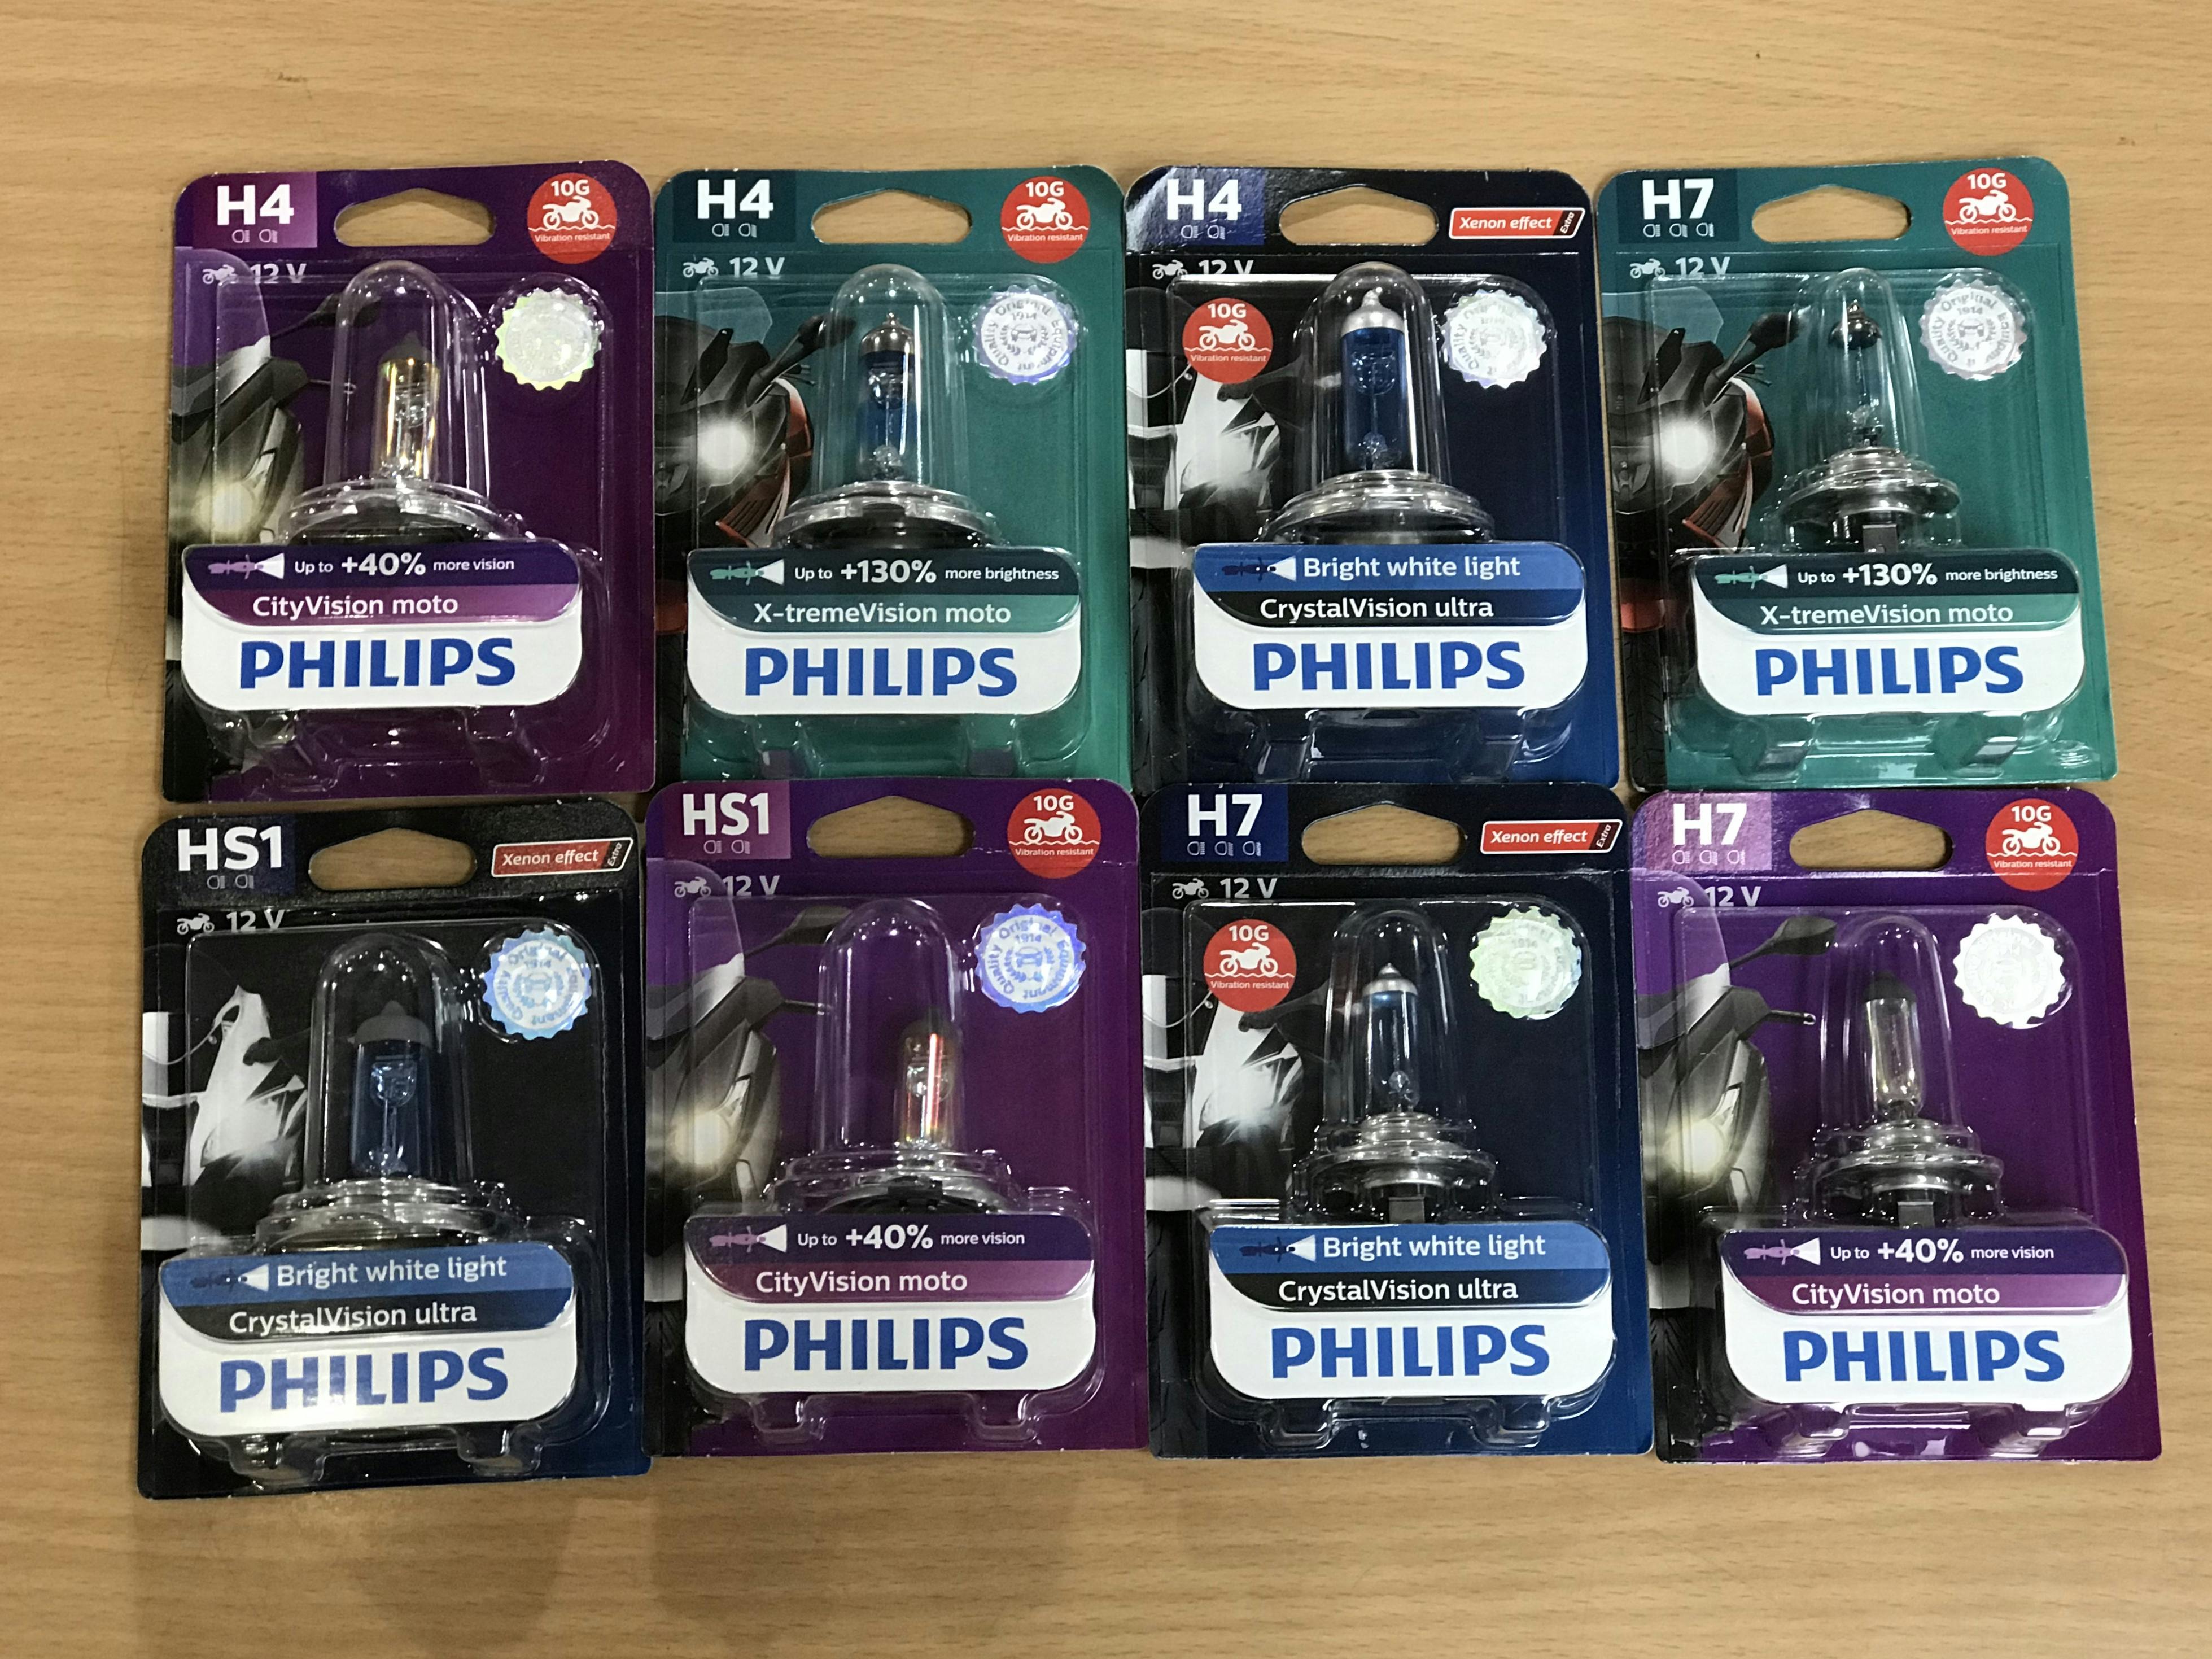 Different Philips branded light globes for motorcycles